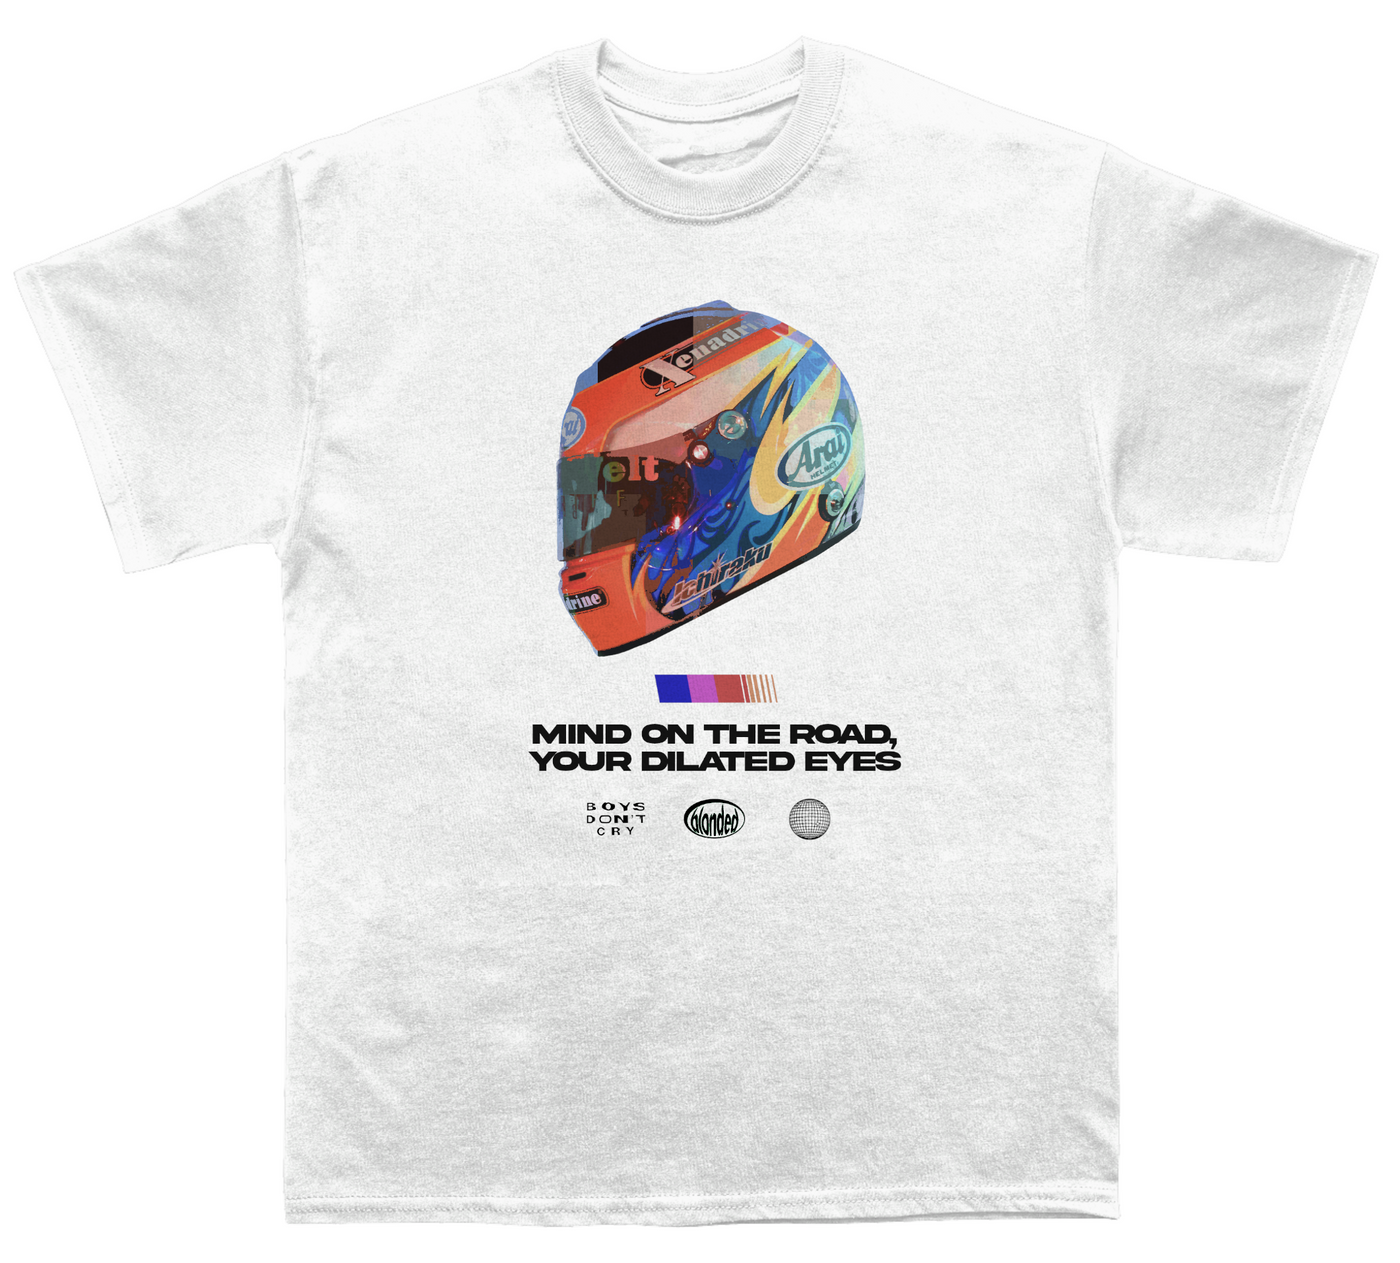 Frank Ocean "Mind On The Road" T-shirt